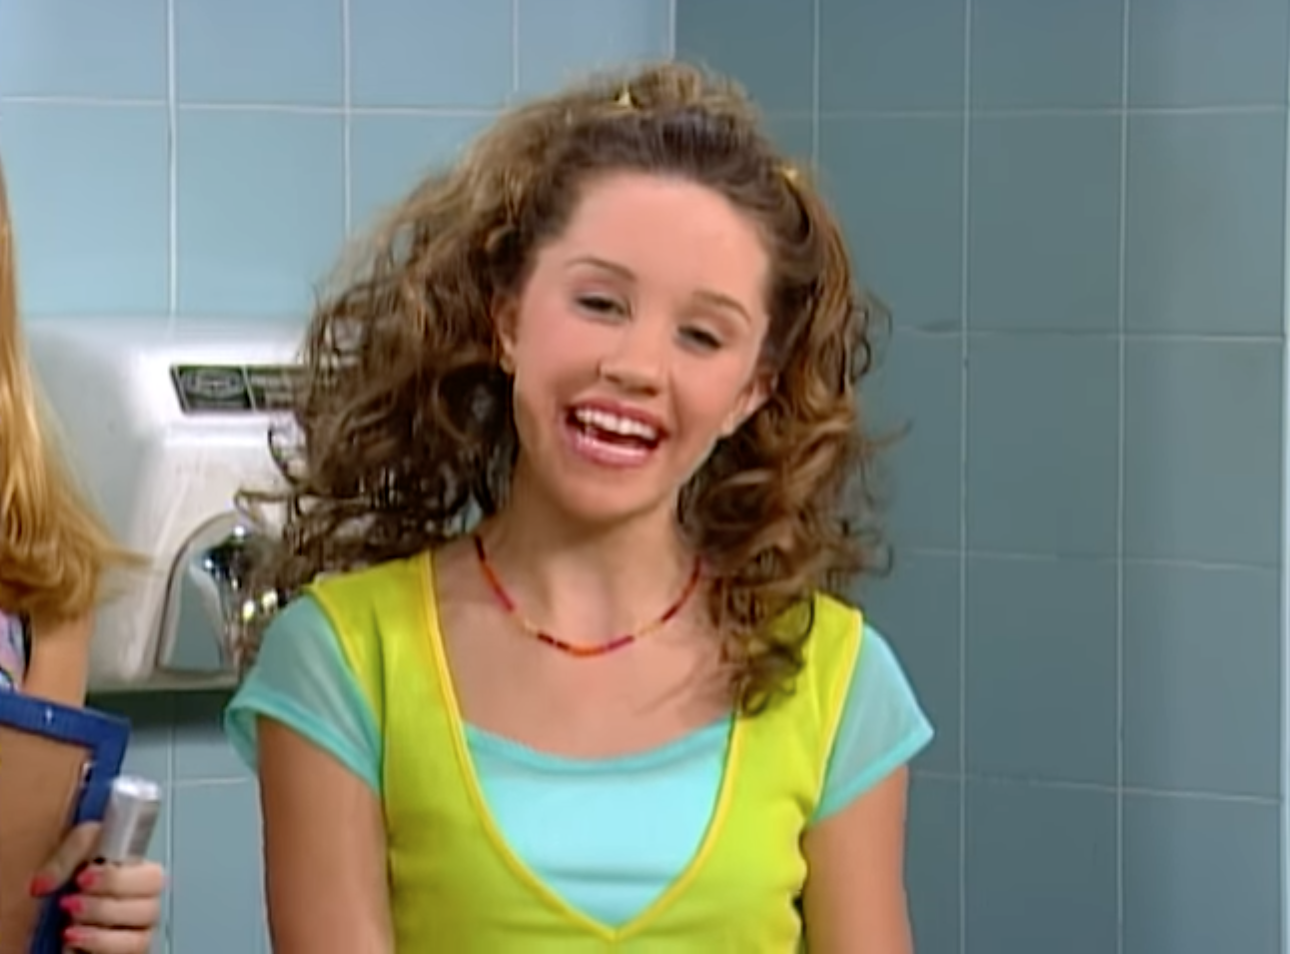 The Amanda Show': Funniest Skits From the Nickelodeon Series | J-14